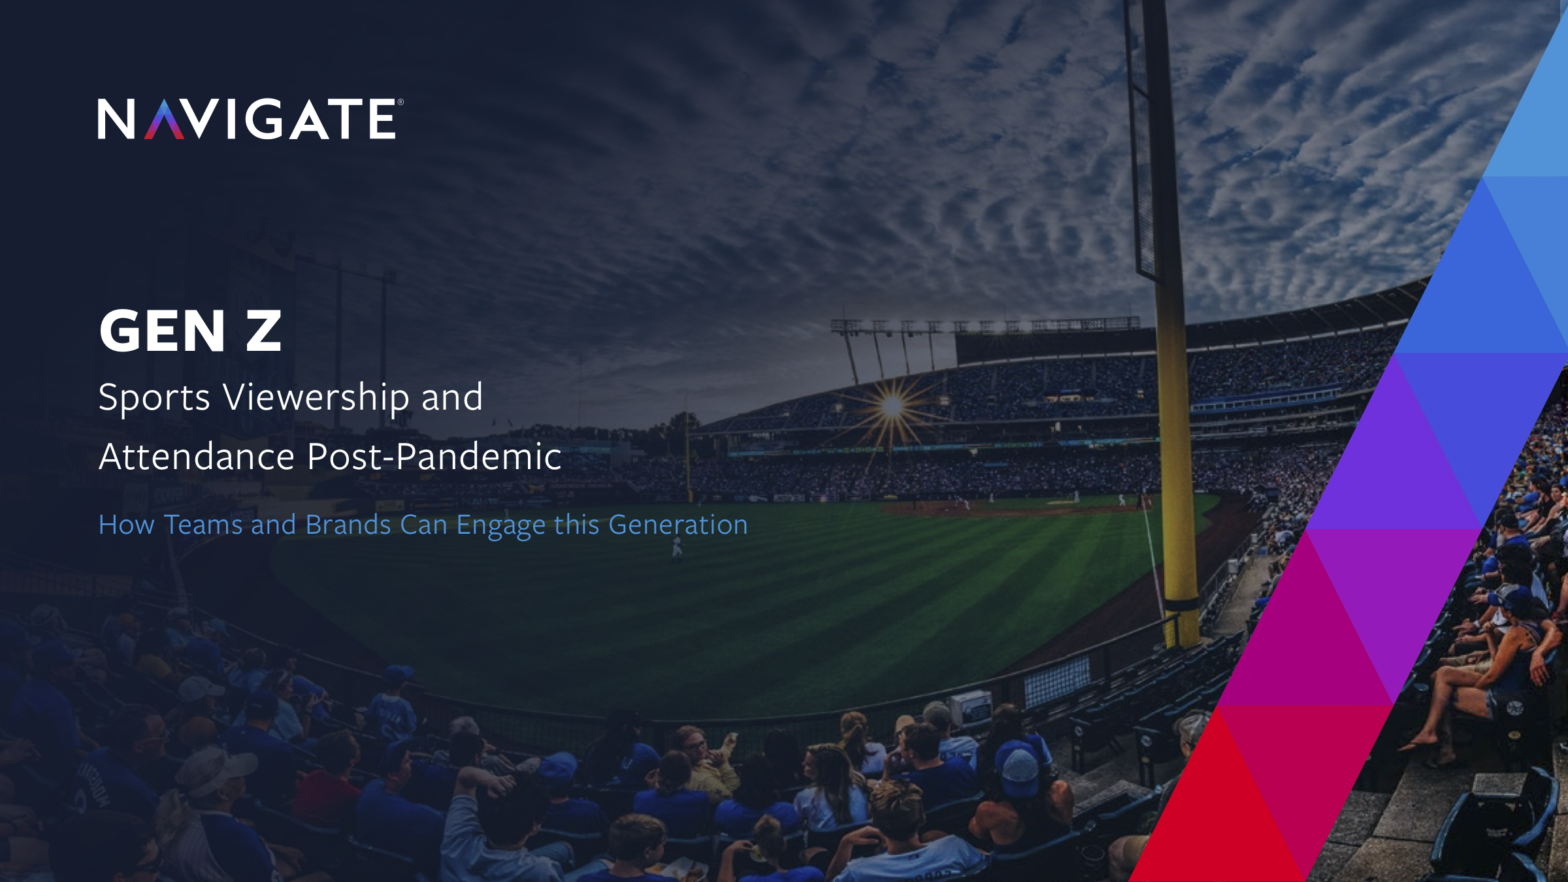 Gen Z Sports Viewership and Attendance Post-Pandemic and how teams can engage the new generation